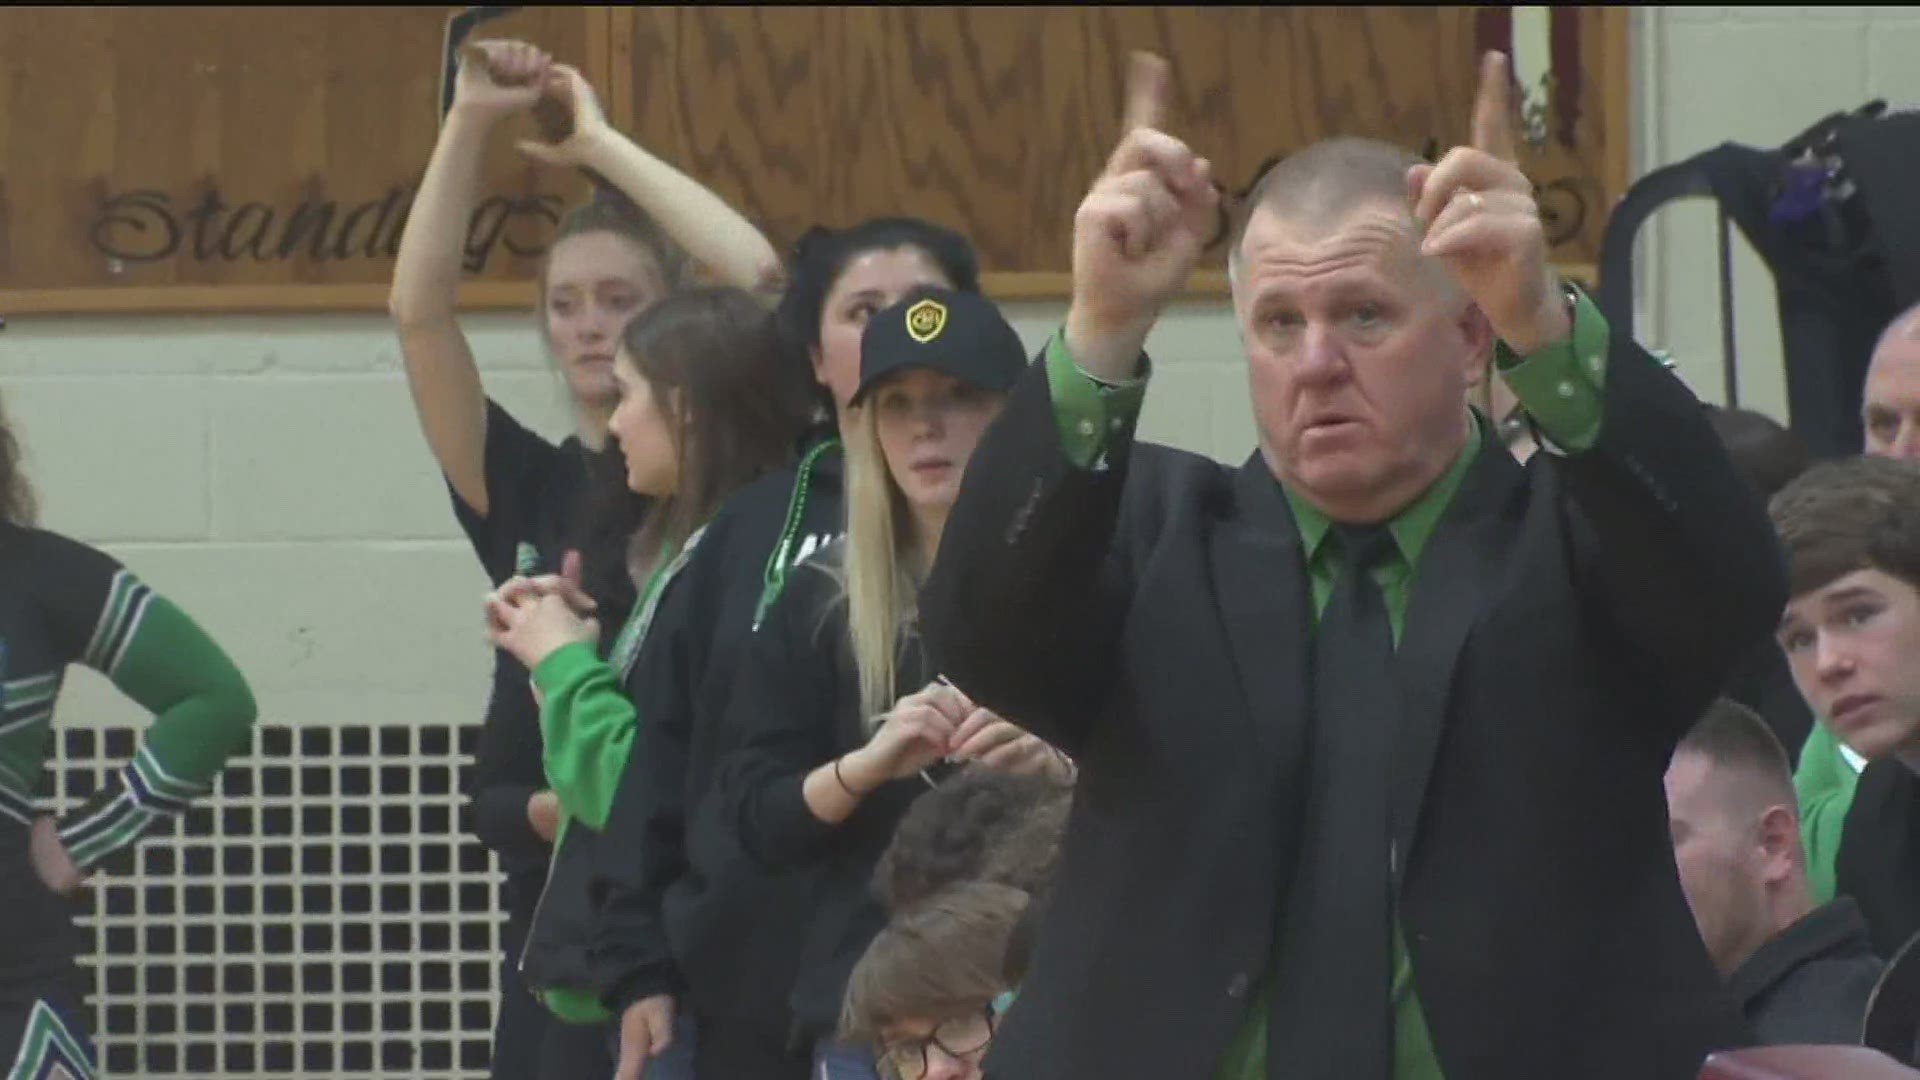 In our FCA story of the week we meet Wethersfield Athletic Director/ Basketball Coach Jeff Parsons.  He will be inducted in the IBCA Hall of Fame.